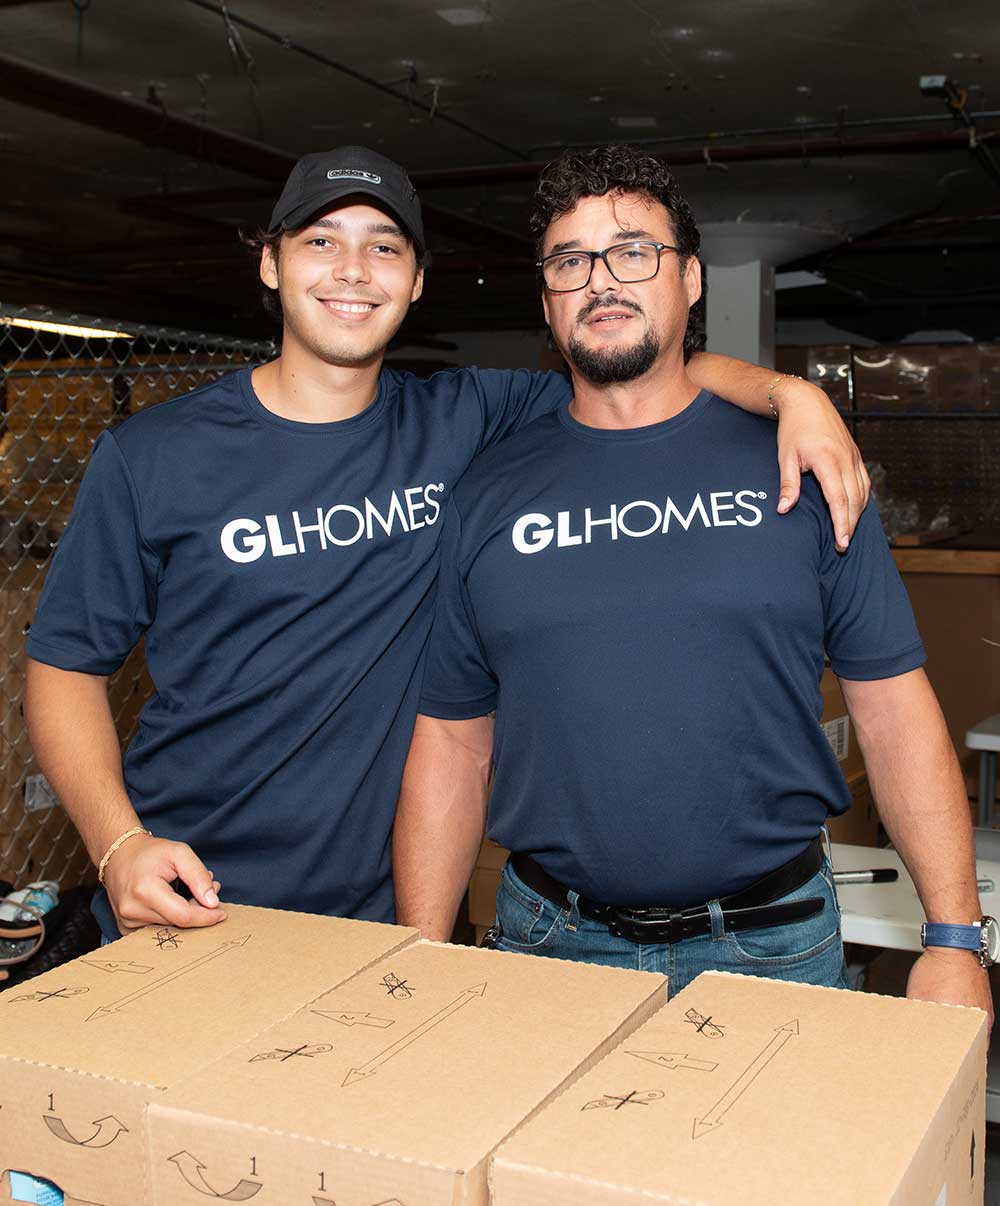 GL Homes supports Healthy Mothers, Healthy Babies by volunteering at event.